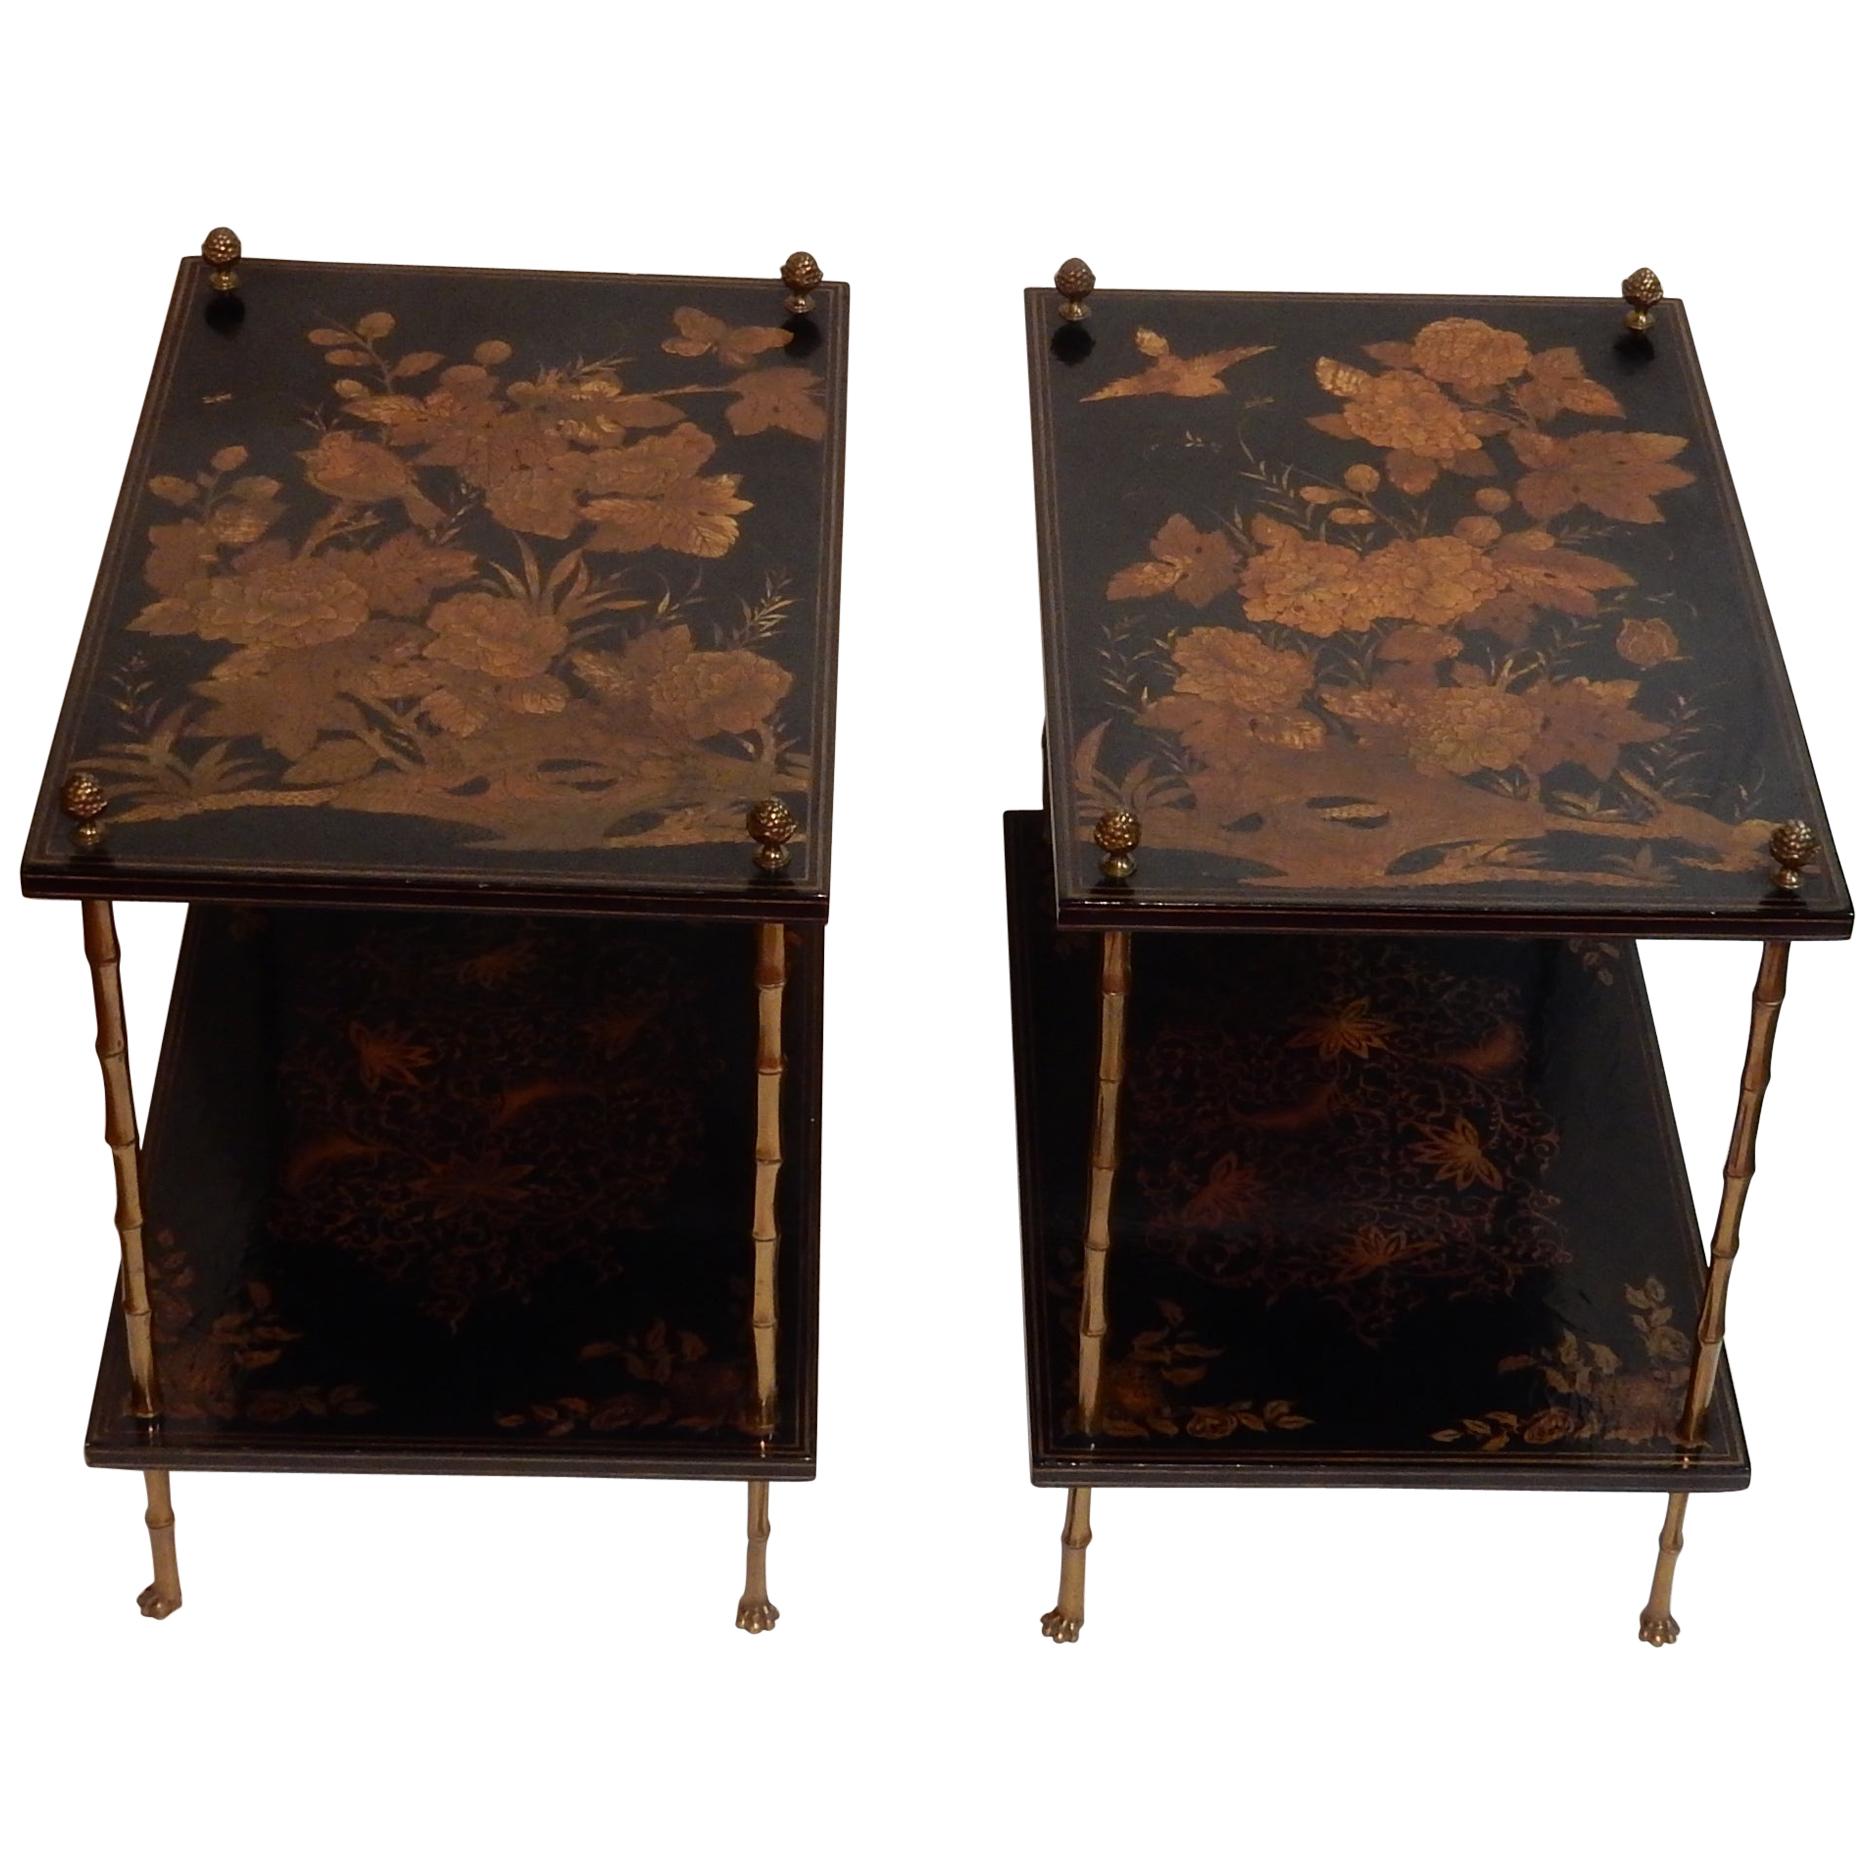 1950 Pair of Tables Style Maison Bagués Golden Bronze, Trays China Lacquer